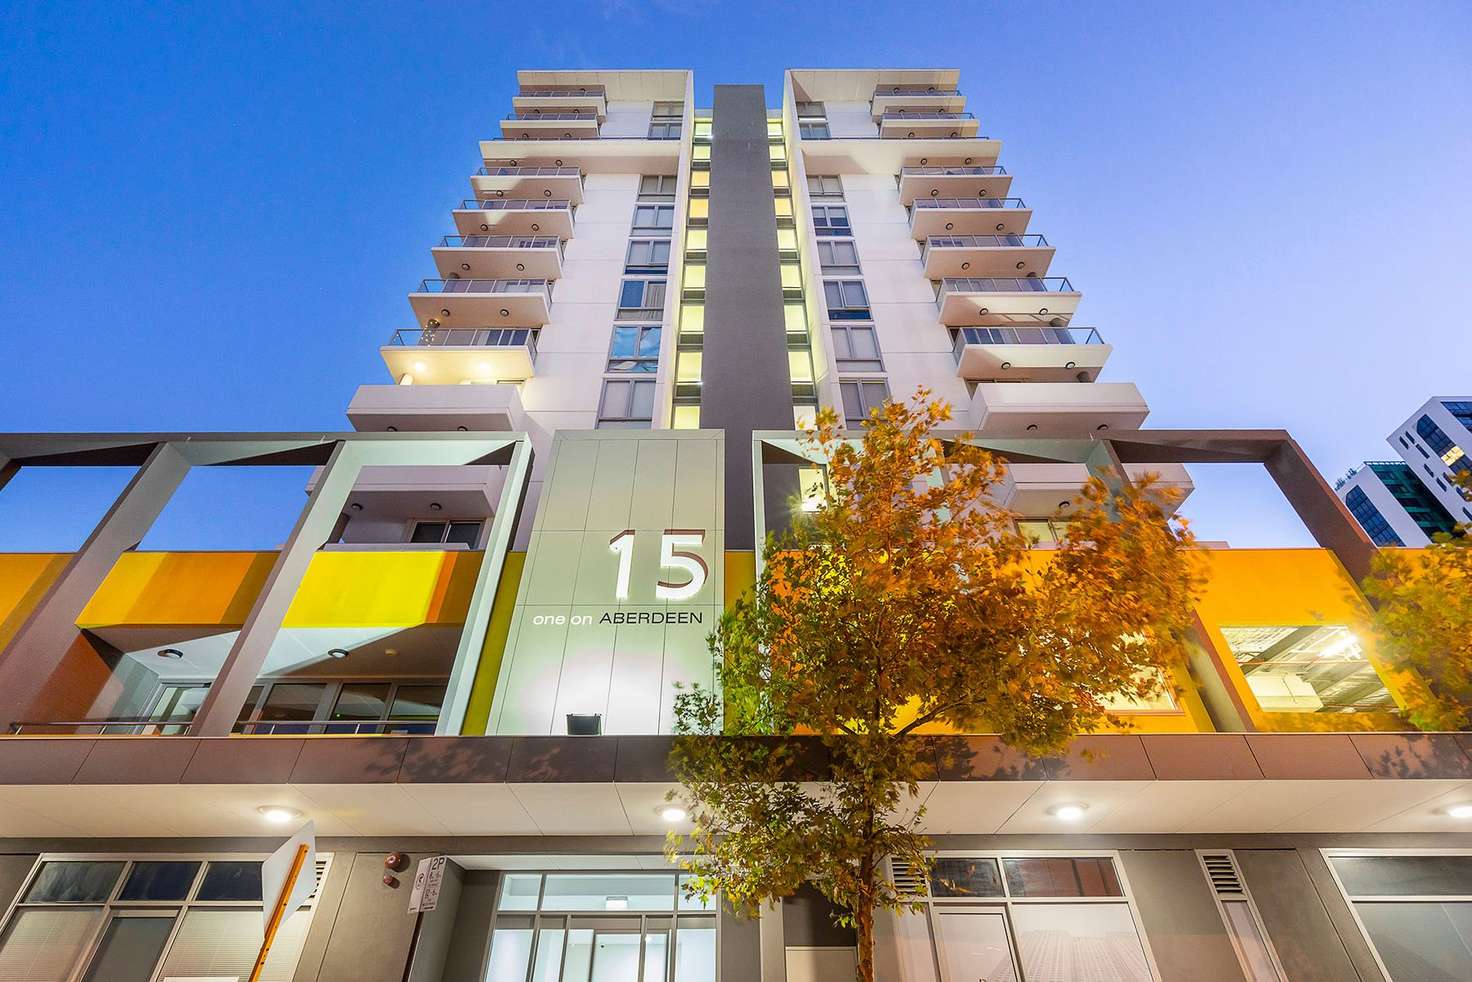 Main view of Homely apartment listing, 110/15 Aberdeen St, Perth WA 6000